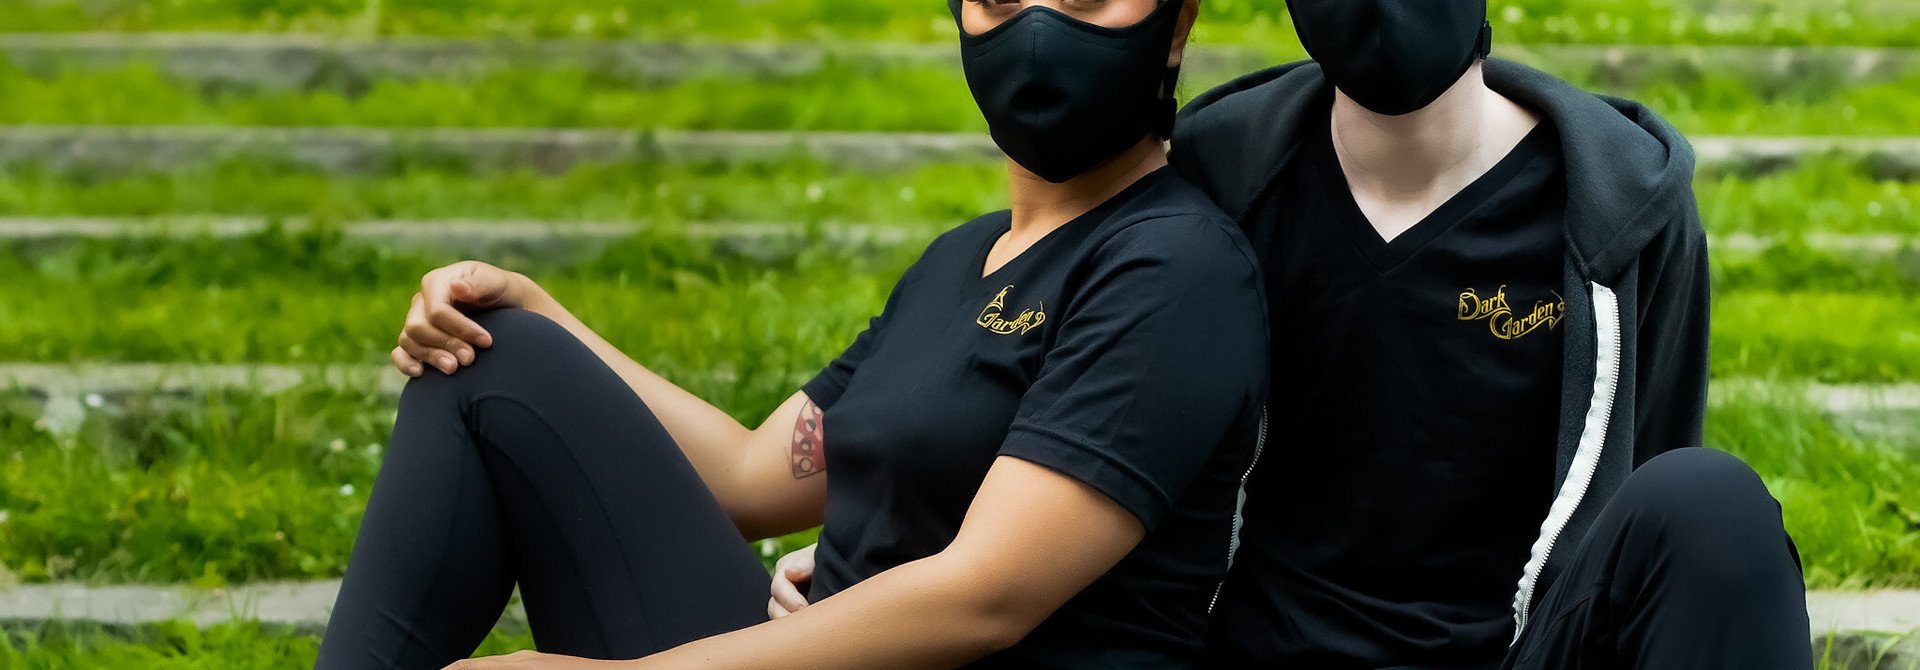 Our specialty Dark Garden made mask is durable as well as comfortable.